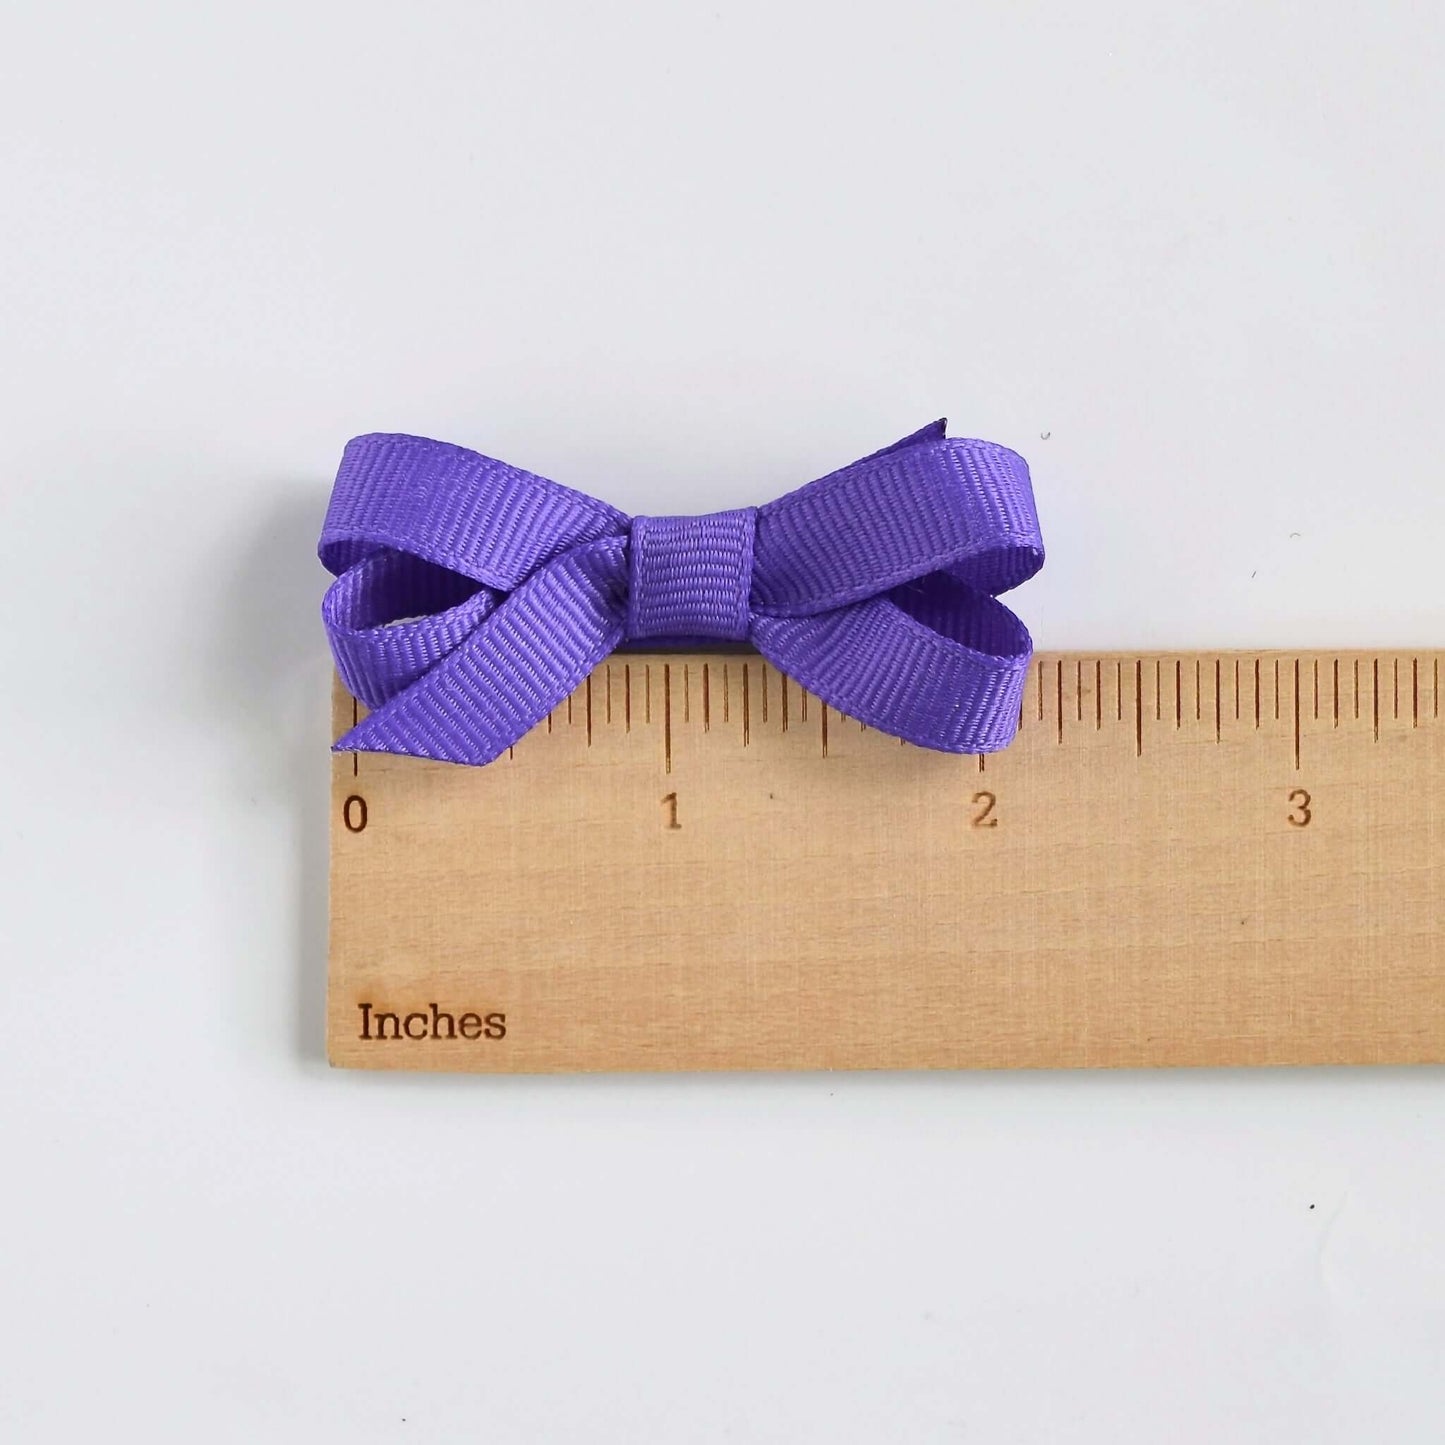 Purple grosgrain ribbon baby hair bow with snap clip and no slip grip, measured with ruler showing 1” W x 2.25” L